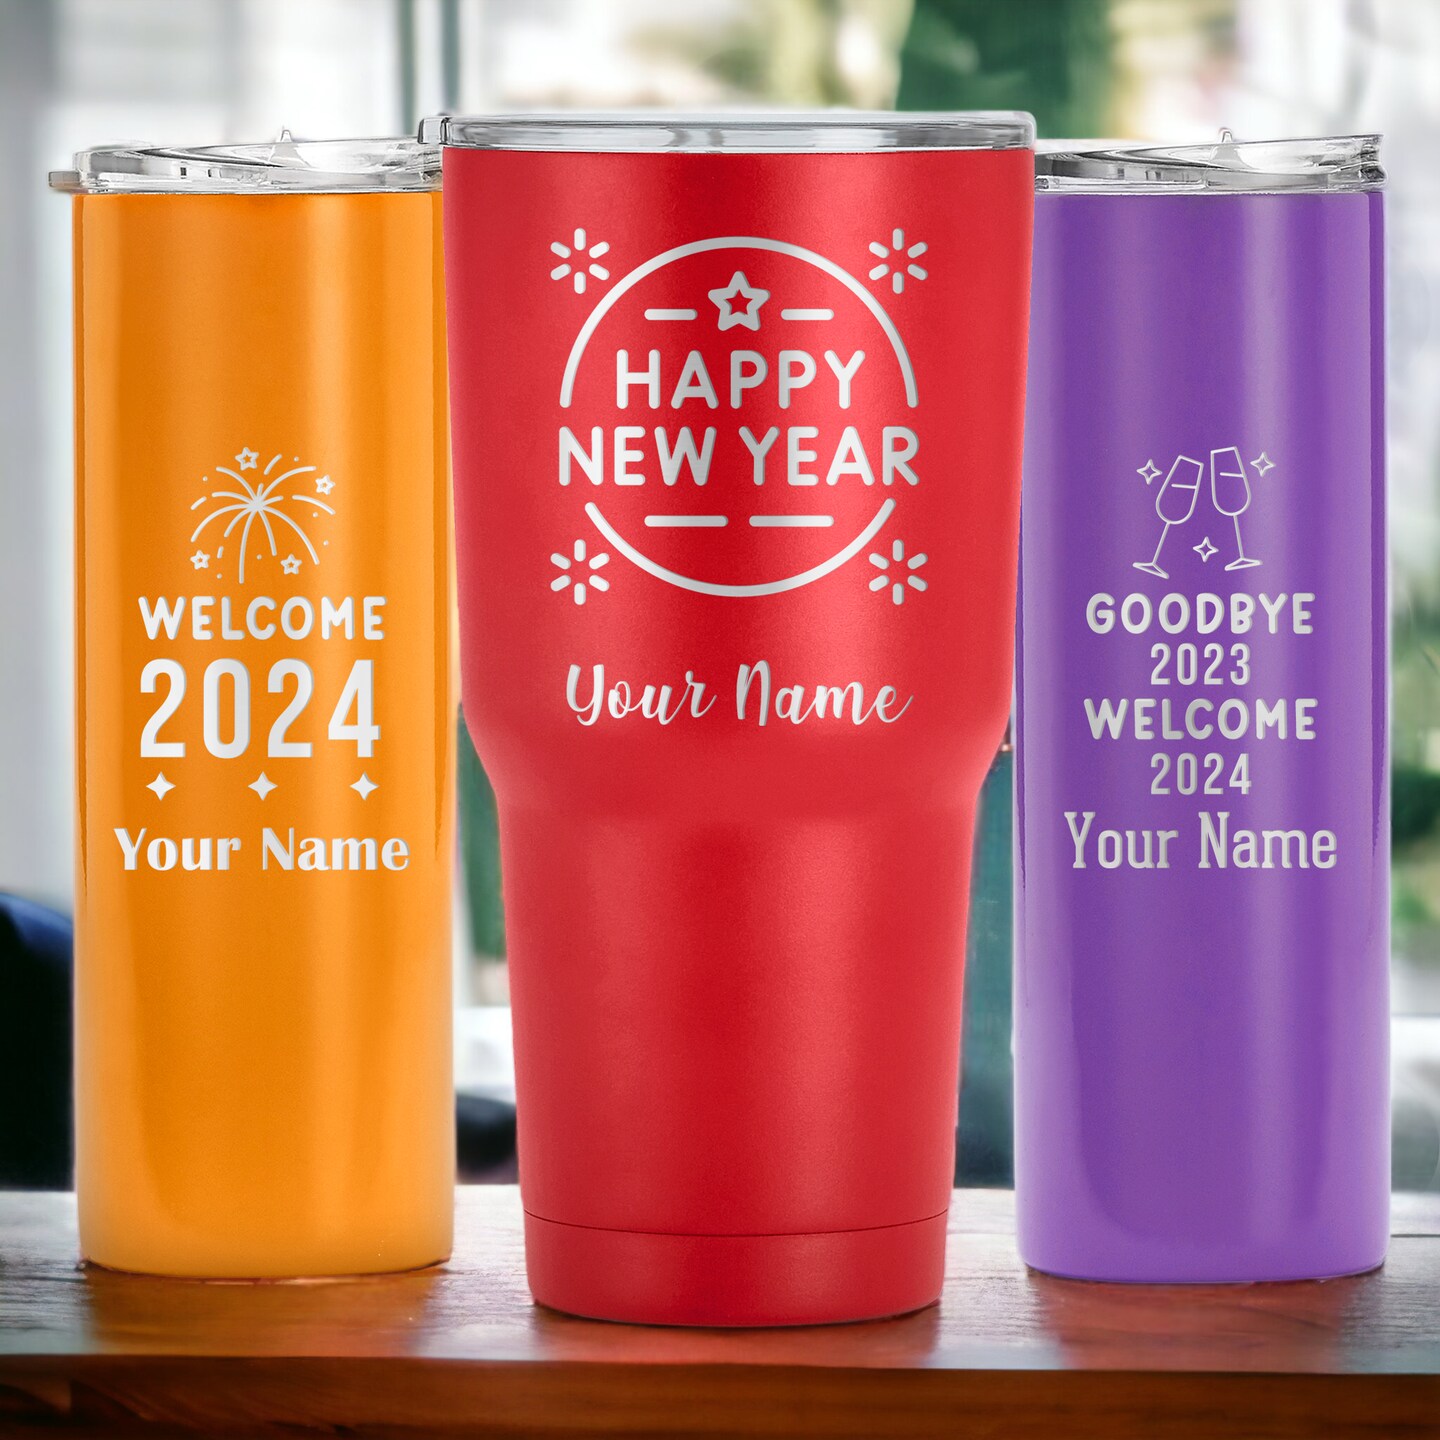 Personalized Red Party Cup, Plastic Double Walled Cup, Party